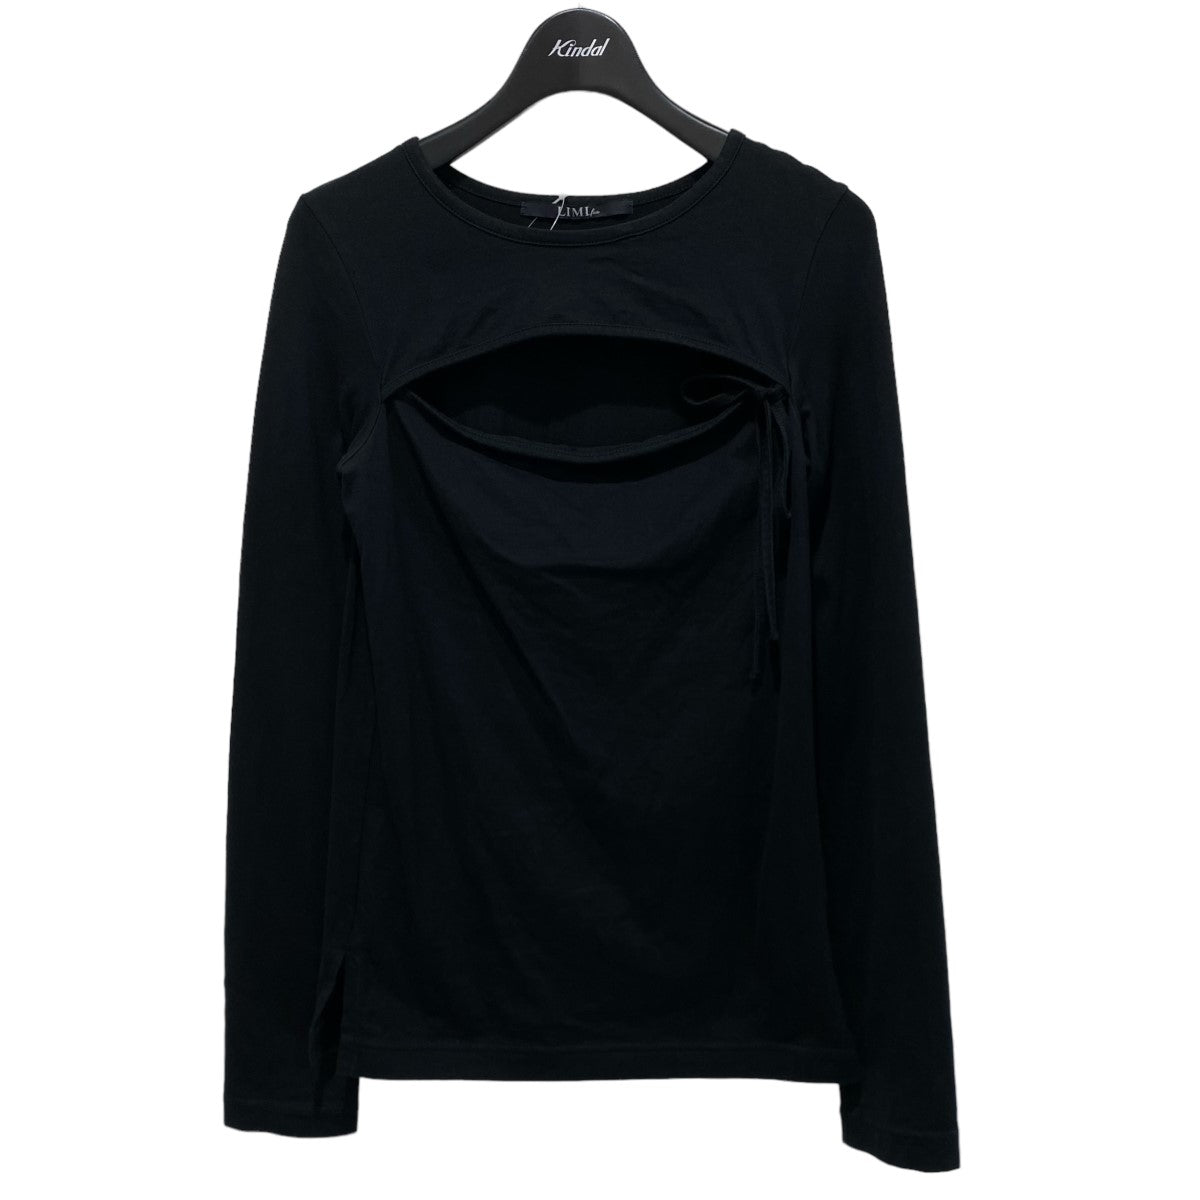 LIMIfeu(リミフゥ) 23AW 60／2 COTTON JERSEY TOP WITH CHEST SLIT LJ 